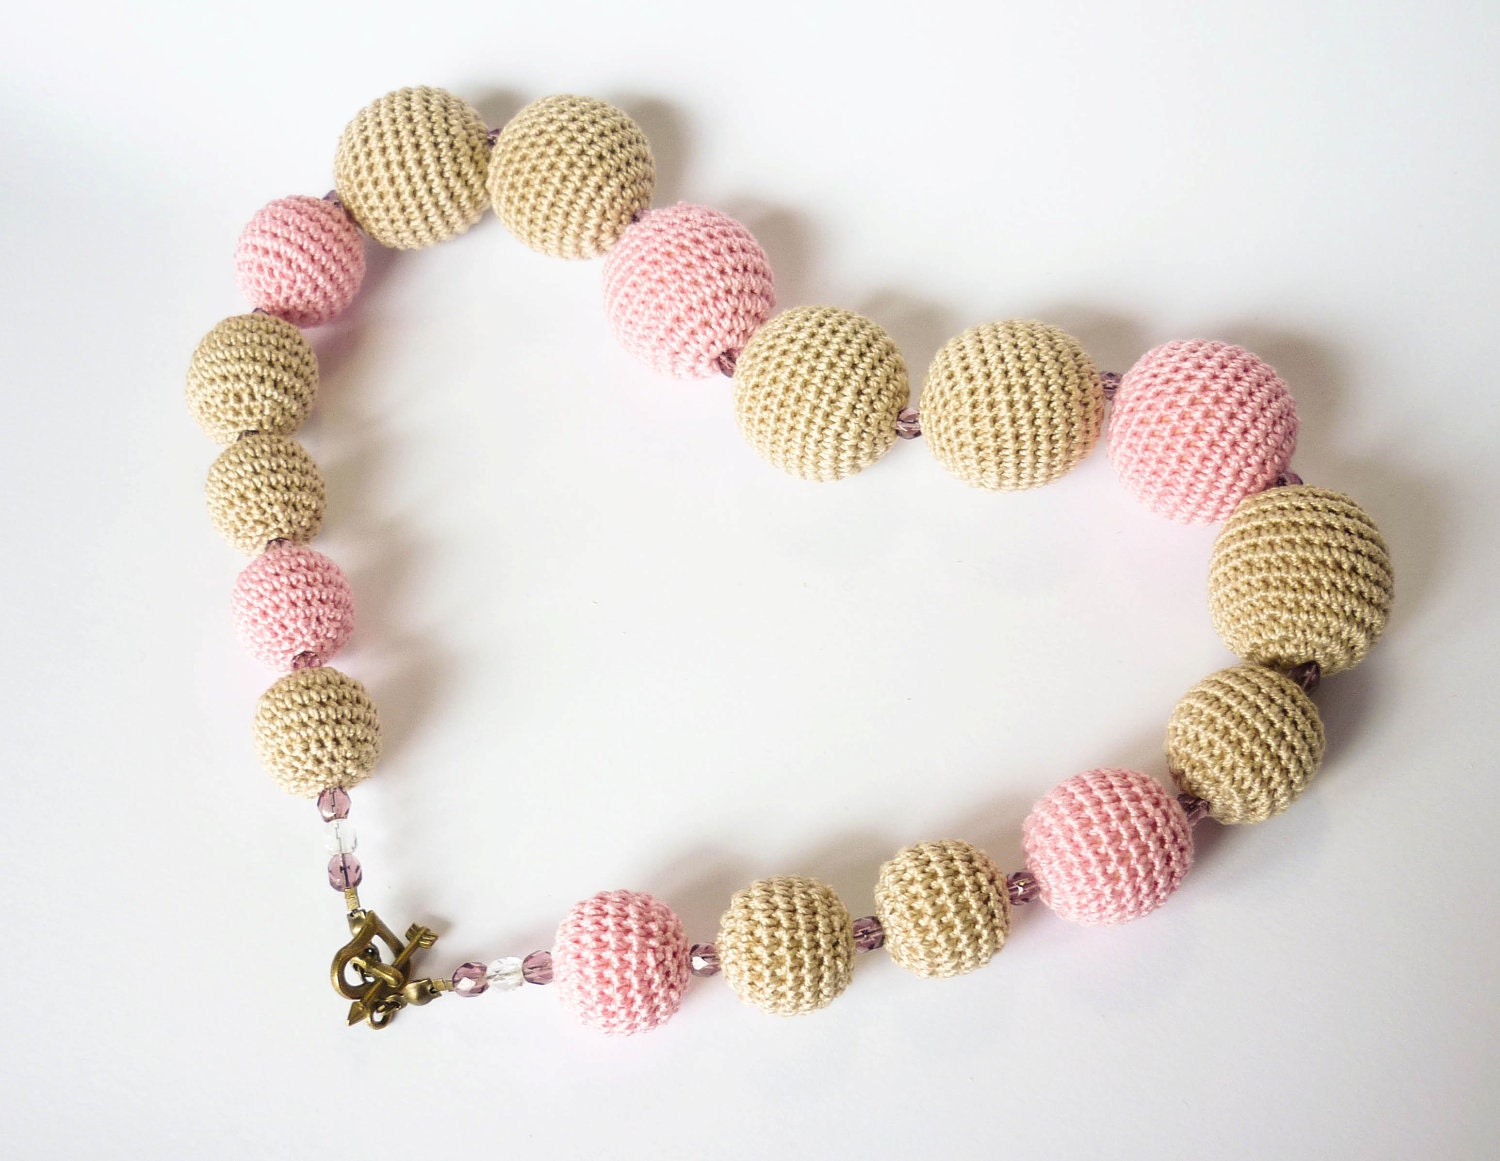 Beige and Pink crochet necklace - Crochet beads necklace - Beige and Pink - For Mom - Under 50 - JanesBeautyStore